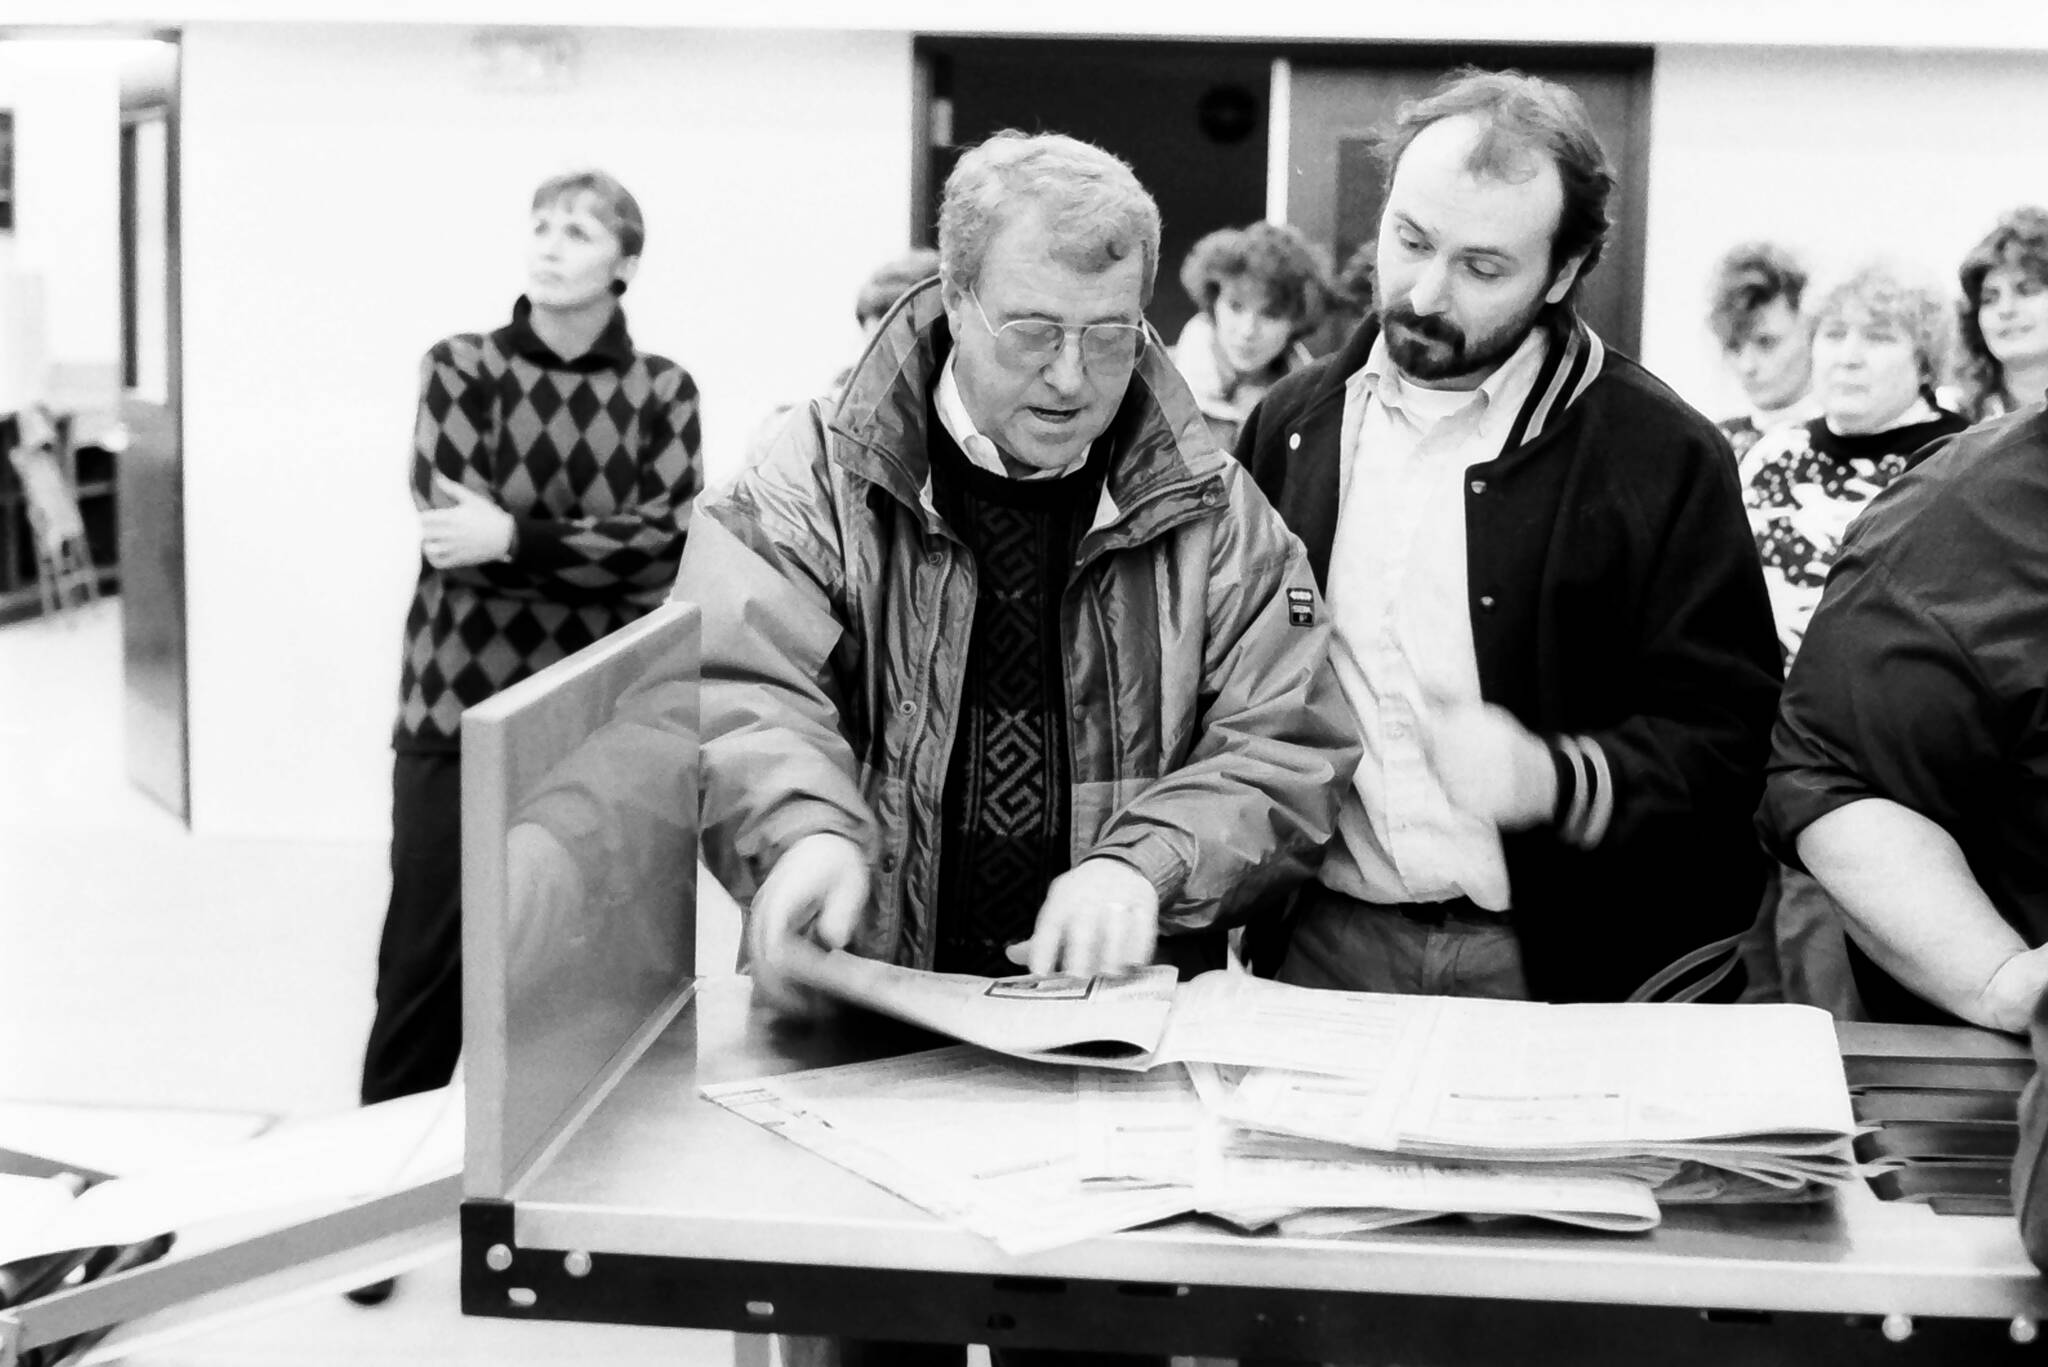 Peninsula Clarion Publisher Ronnie Hughes and Assistant Managing Editor Jon Little look over one of the first newspapers to come off the Goss Suburban press in December 1992 in the Peninsula Clarion pressroom in Kenai, Alaska. (Roy Shapeley/Peninsula Clarion)